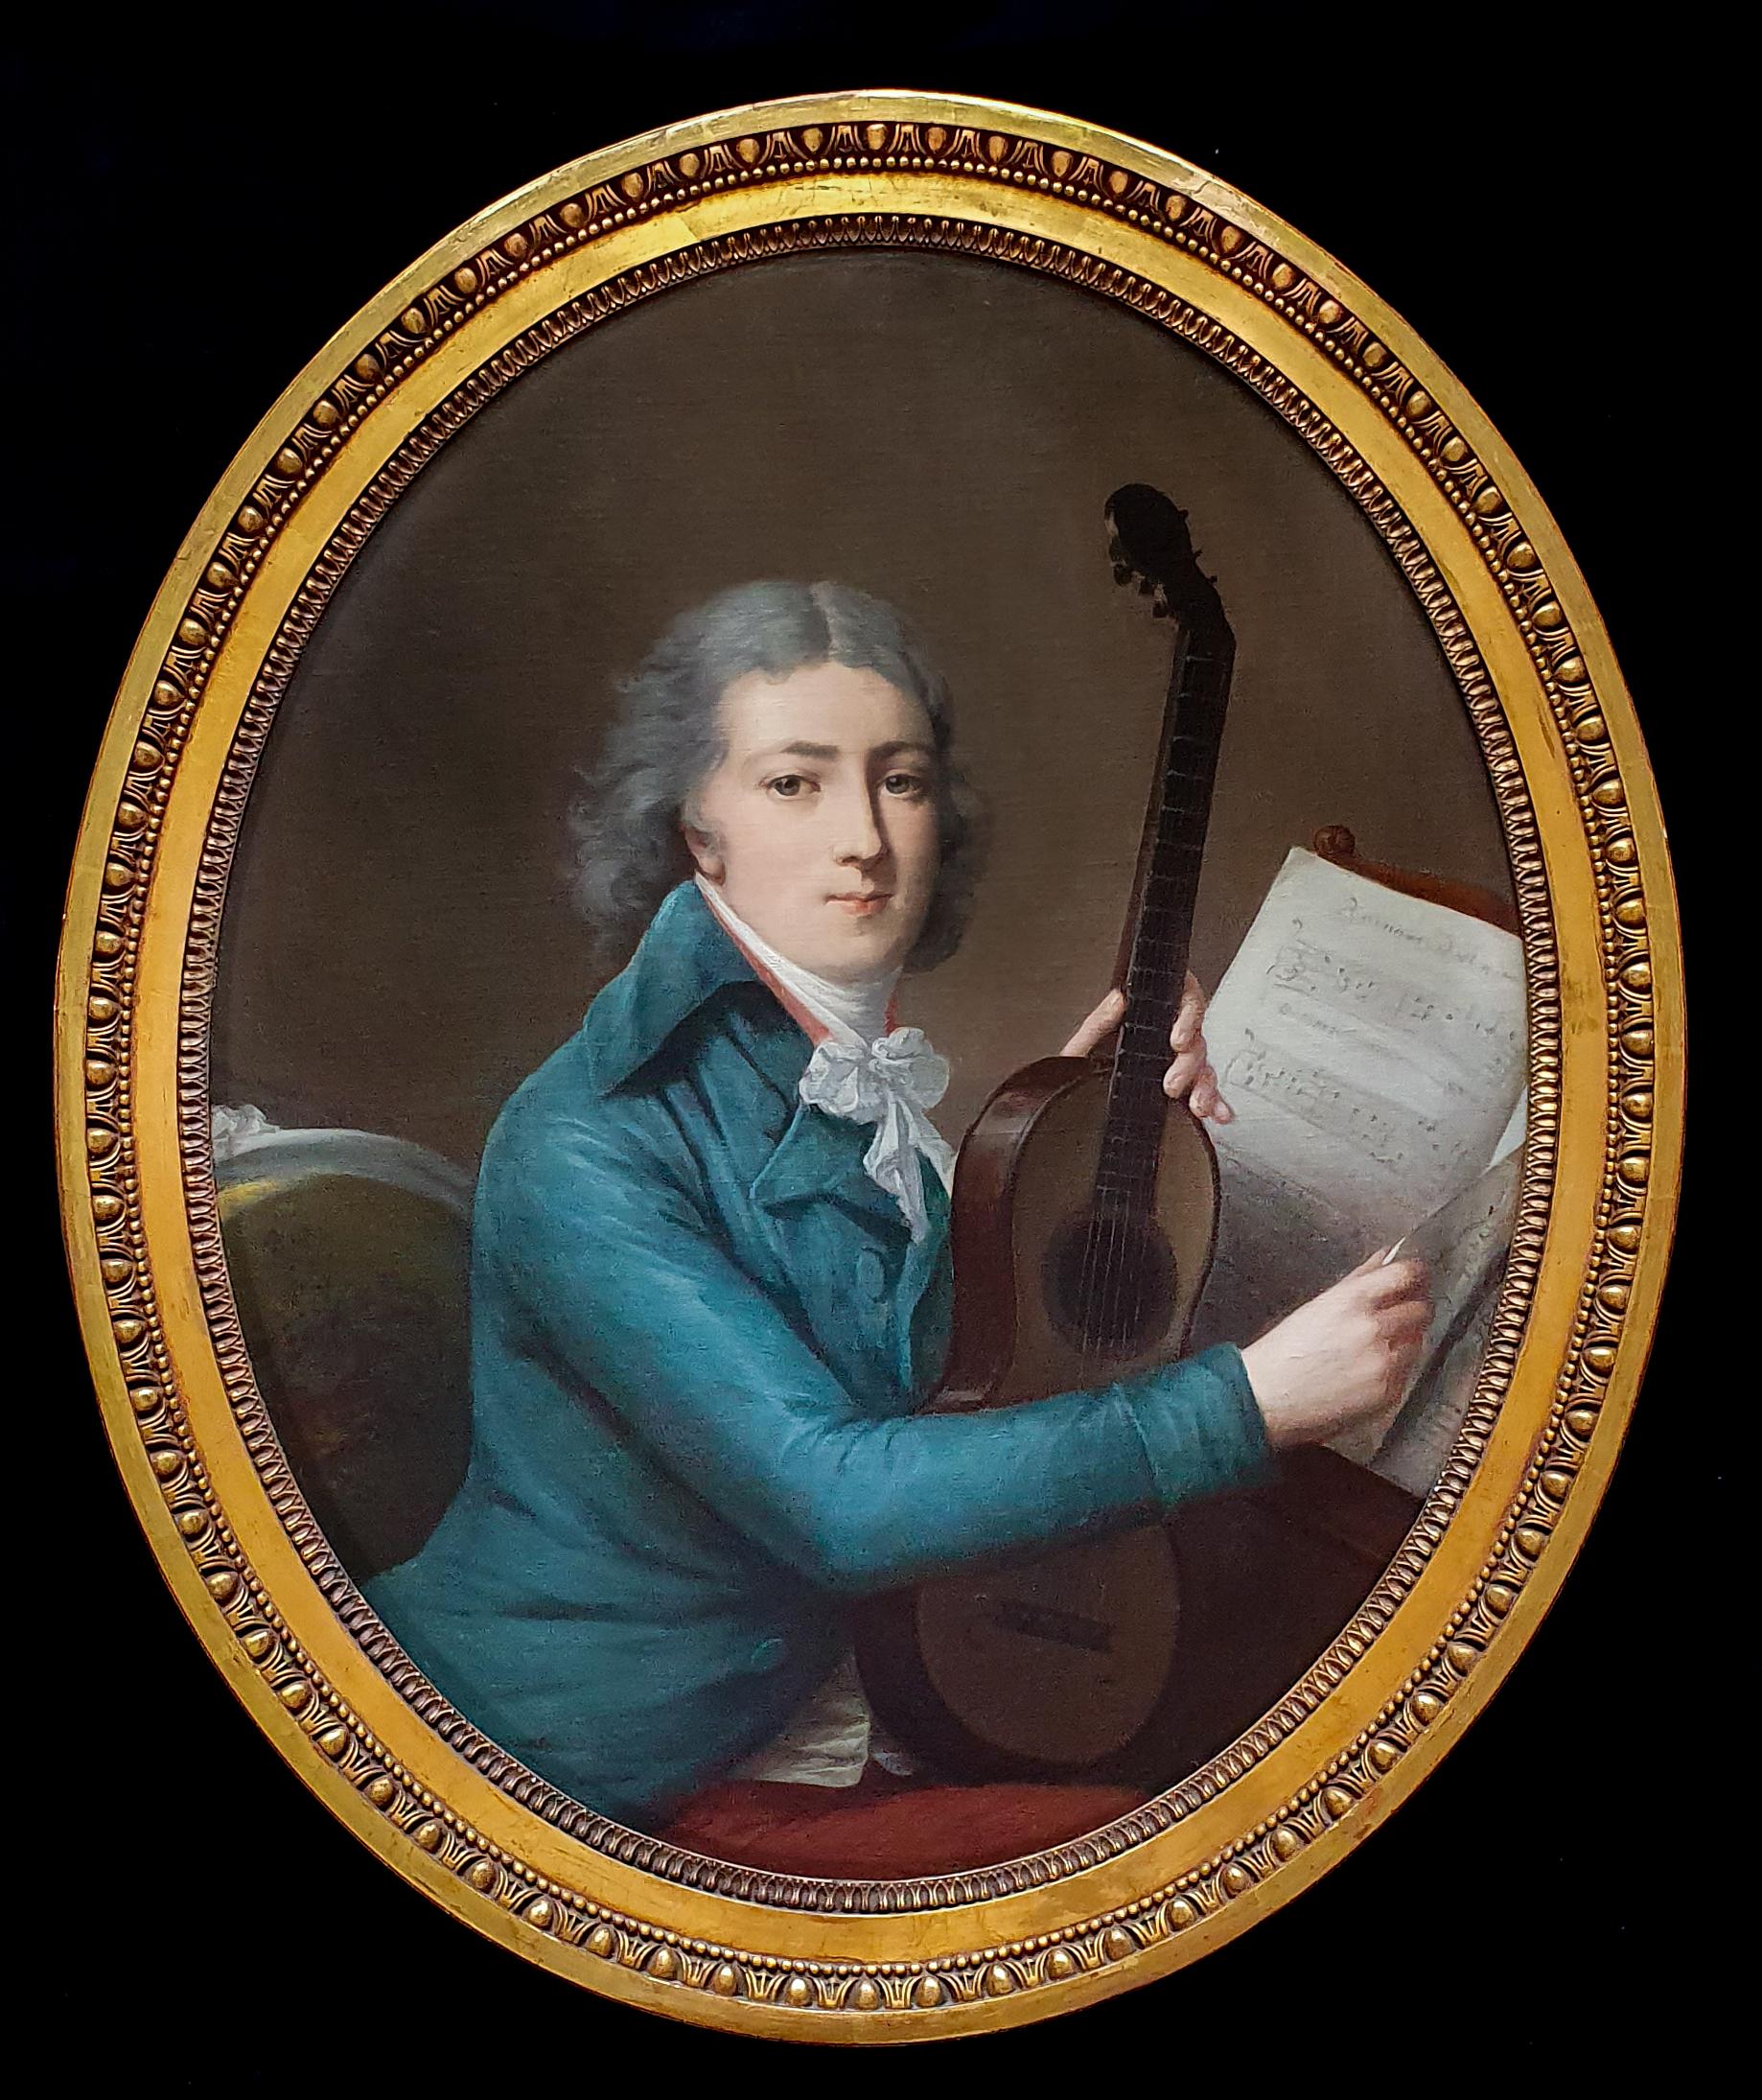 Circle of Antoine Vestier Portrait Painting - 18th Century Portrait of a Gentleman with a Six Single-String Guitar